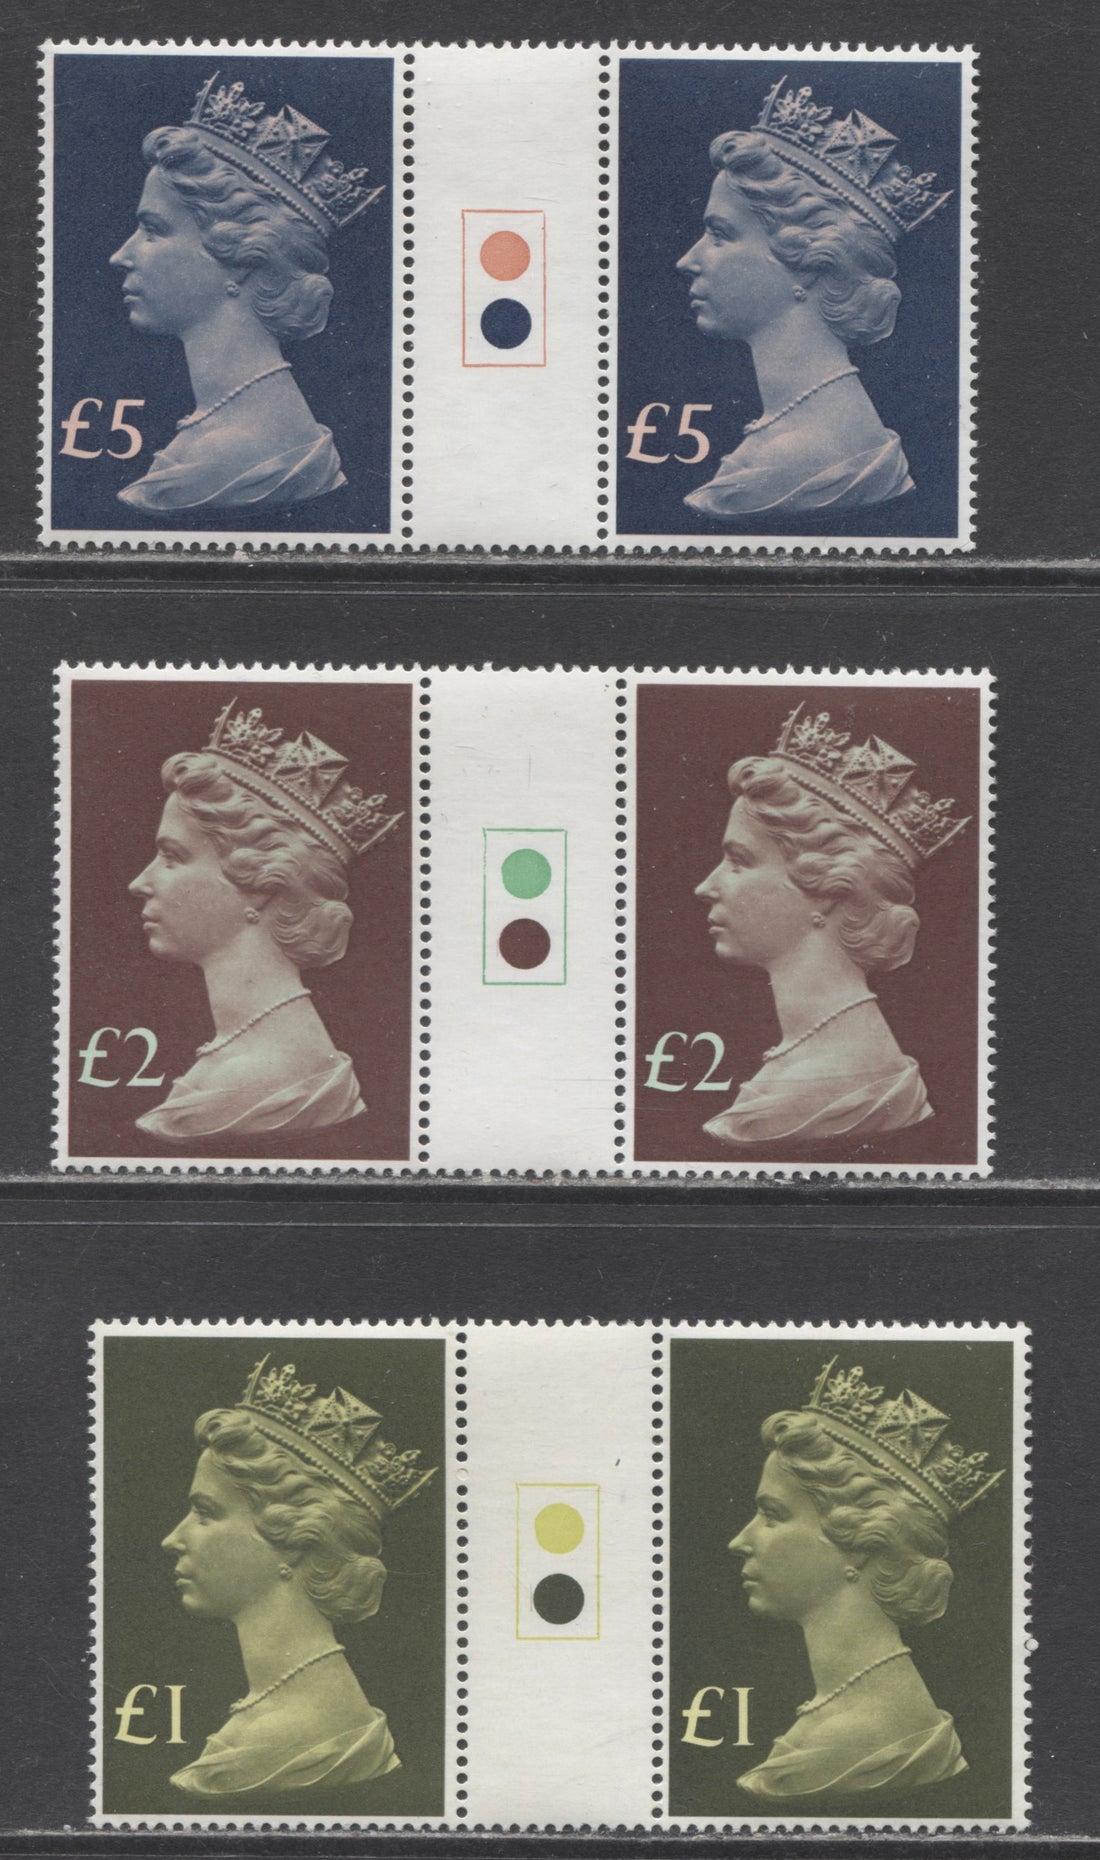 Royal Mail issues Machin definitives to meet new postal rates